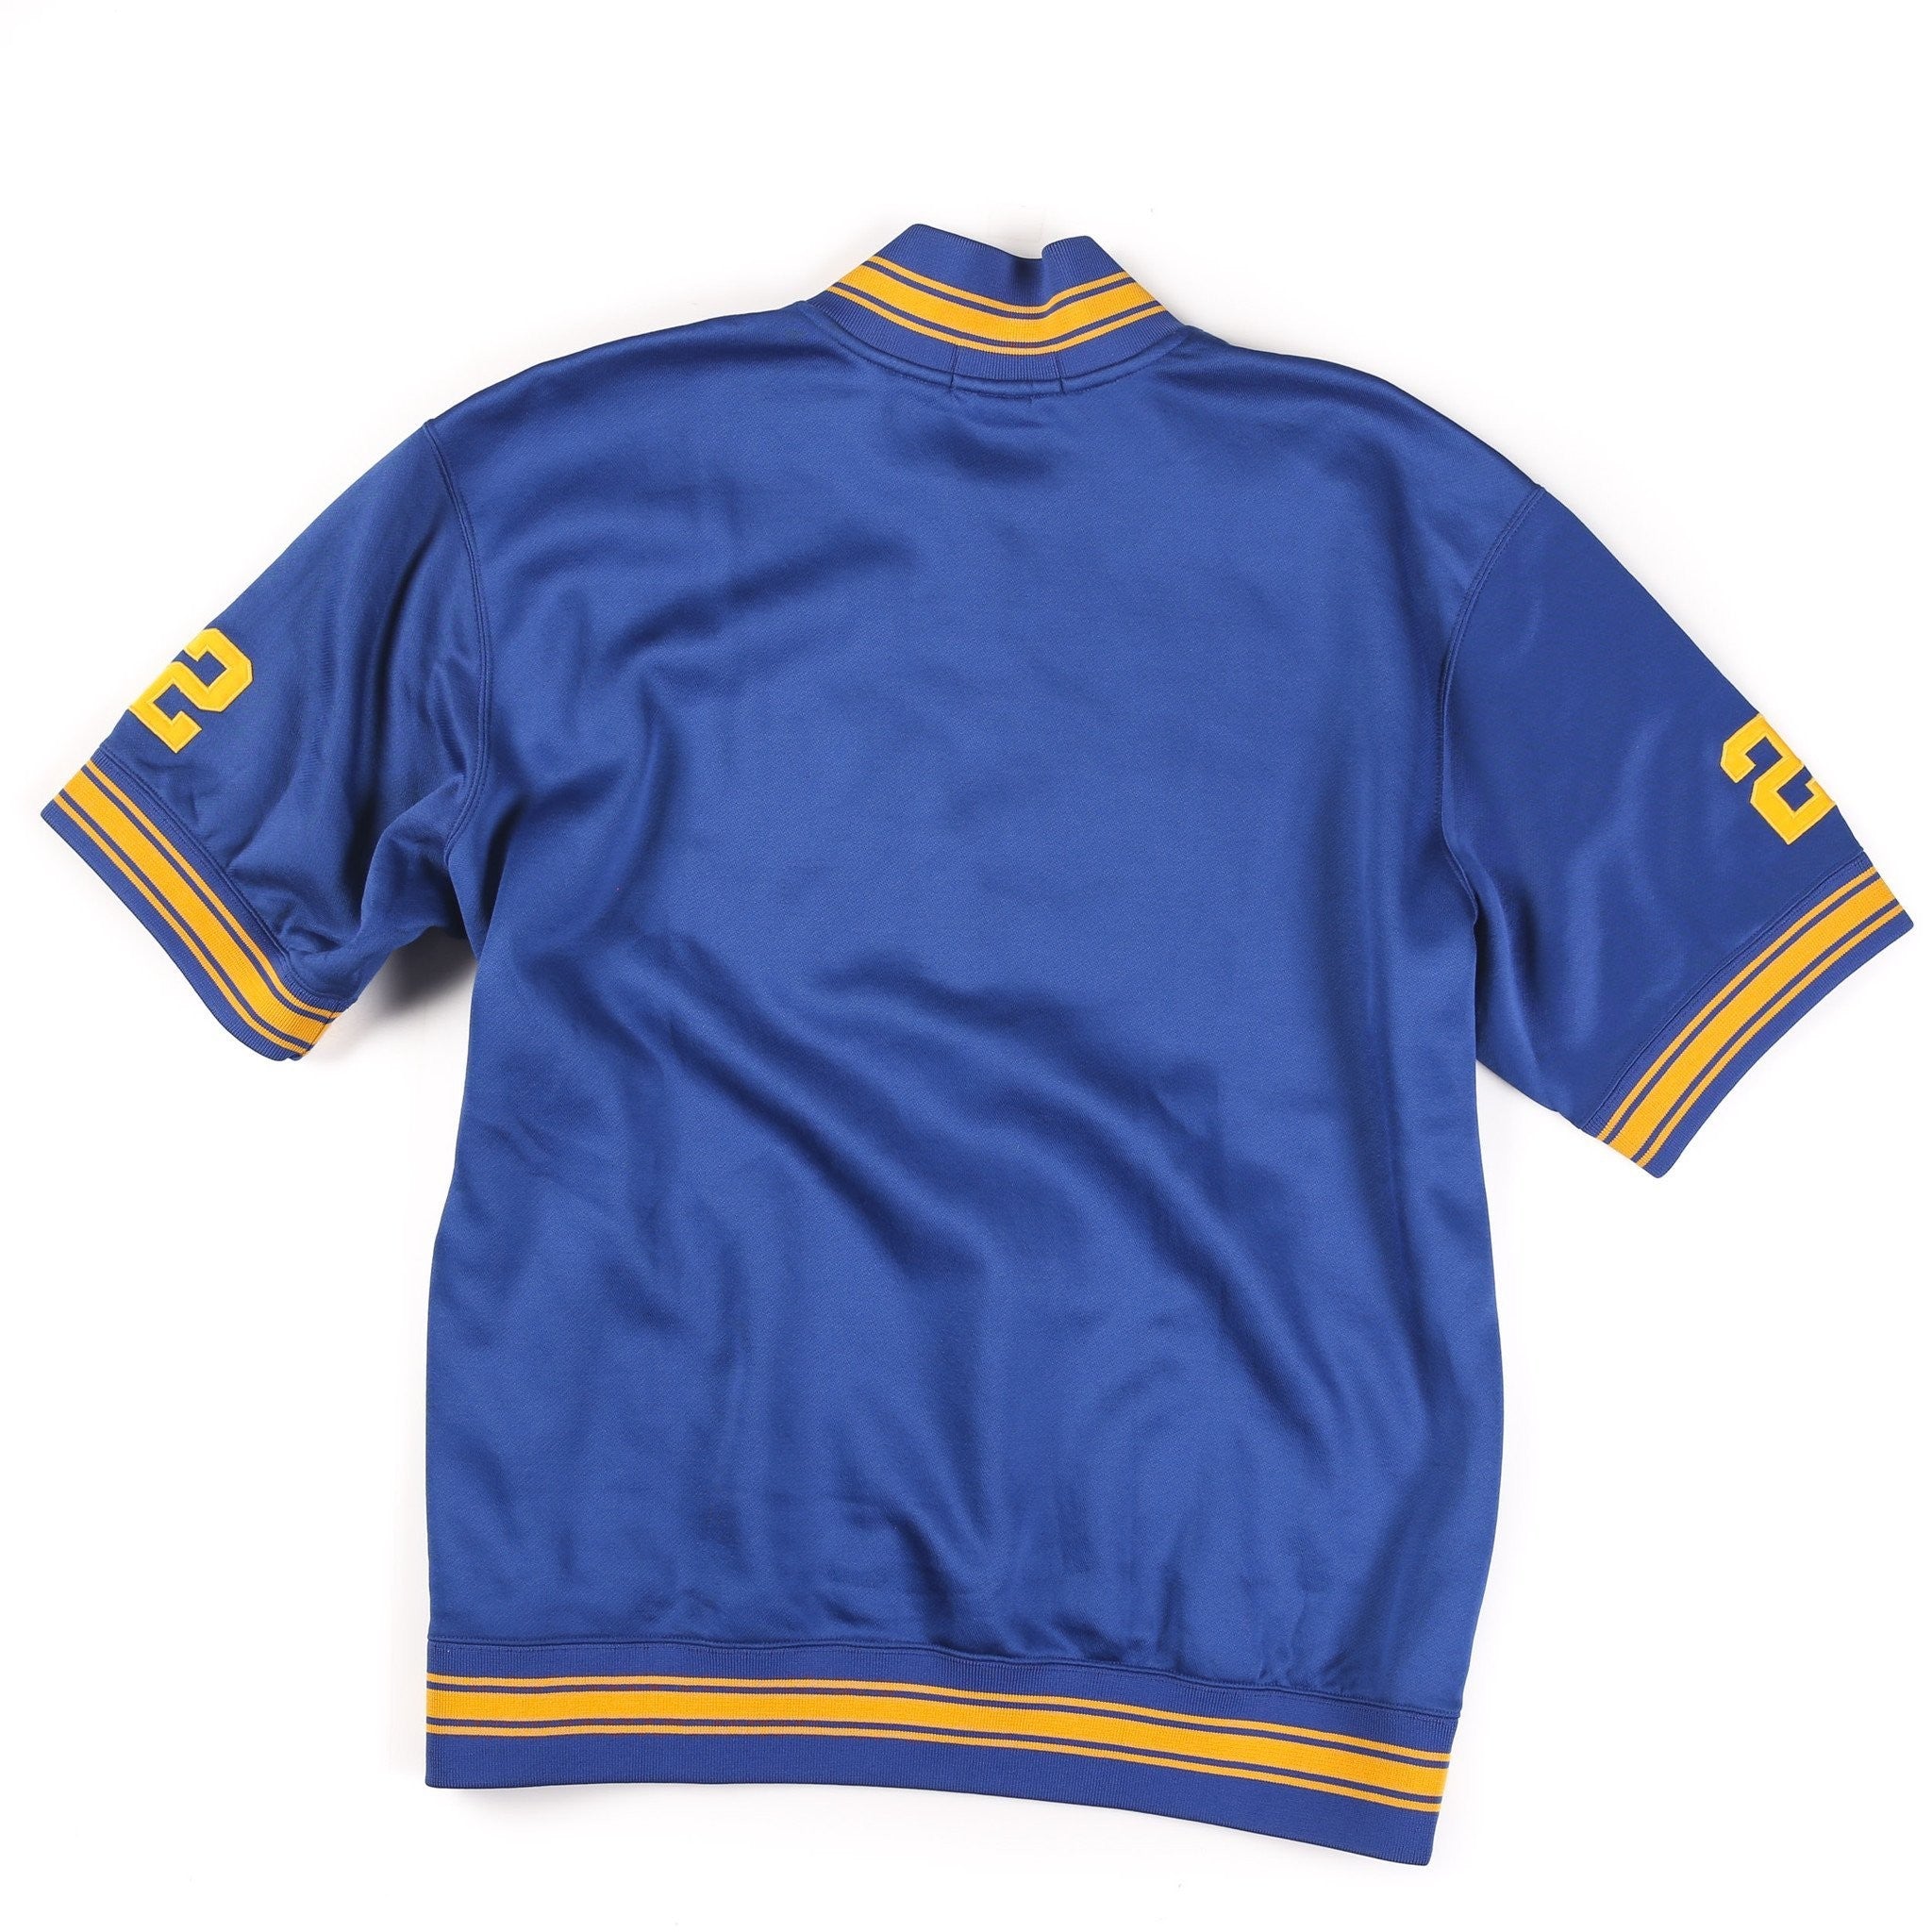 POLO SPORT FIELD H1 ATHLETIC DEPT 22 JERSEY // ROYAL BLUE